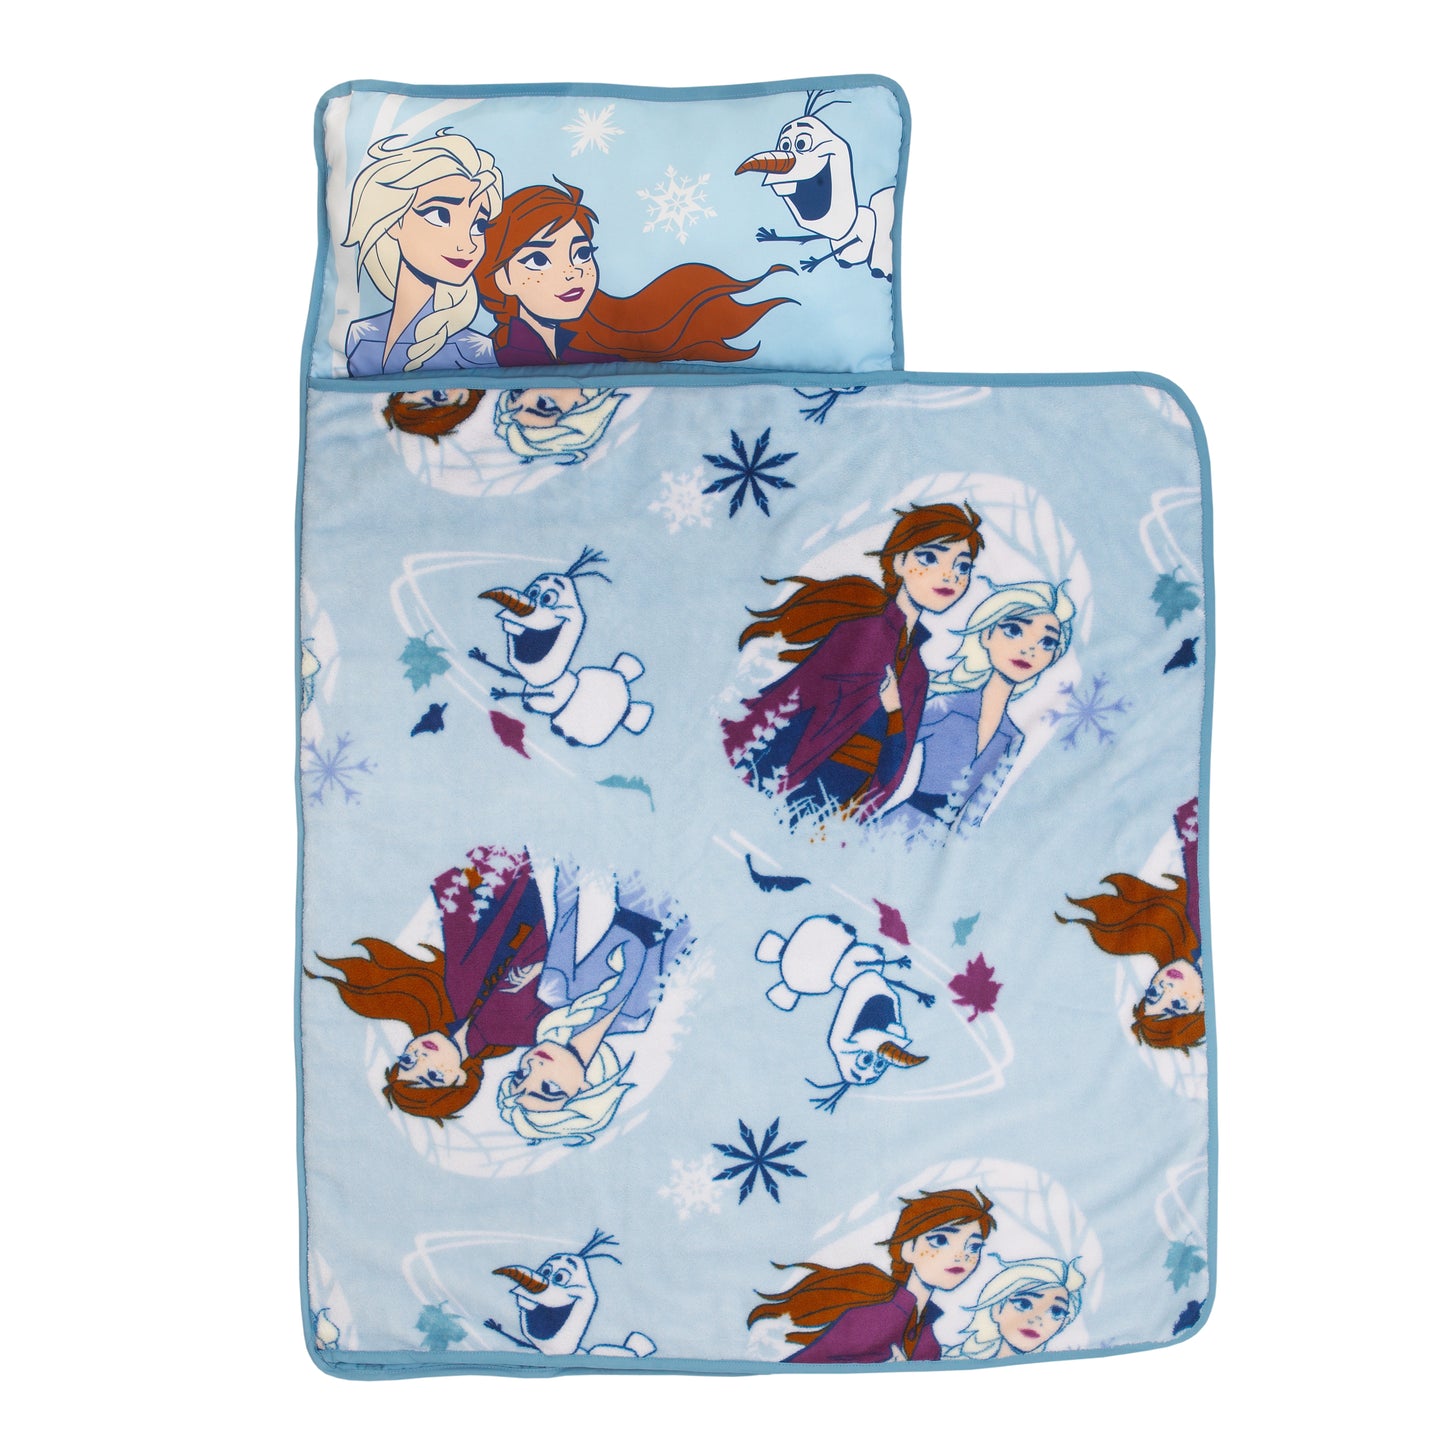 Disney Frozen 2 - Spirit of Nature Padded Nap Mat With Built In Pillow, Blanket and Name Label